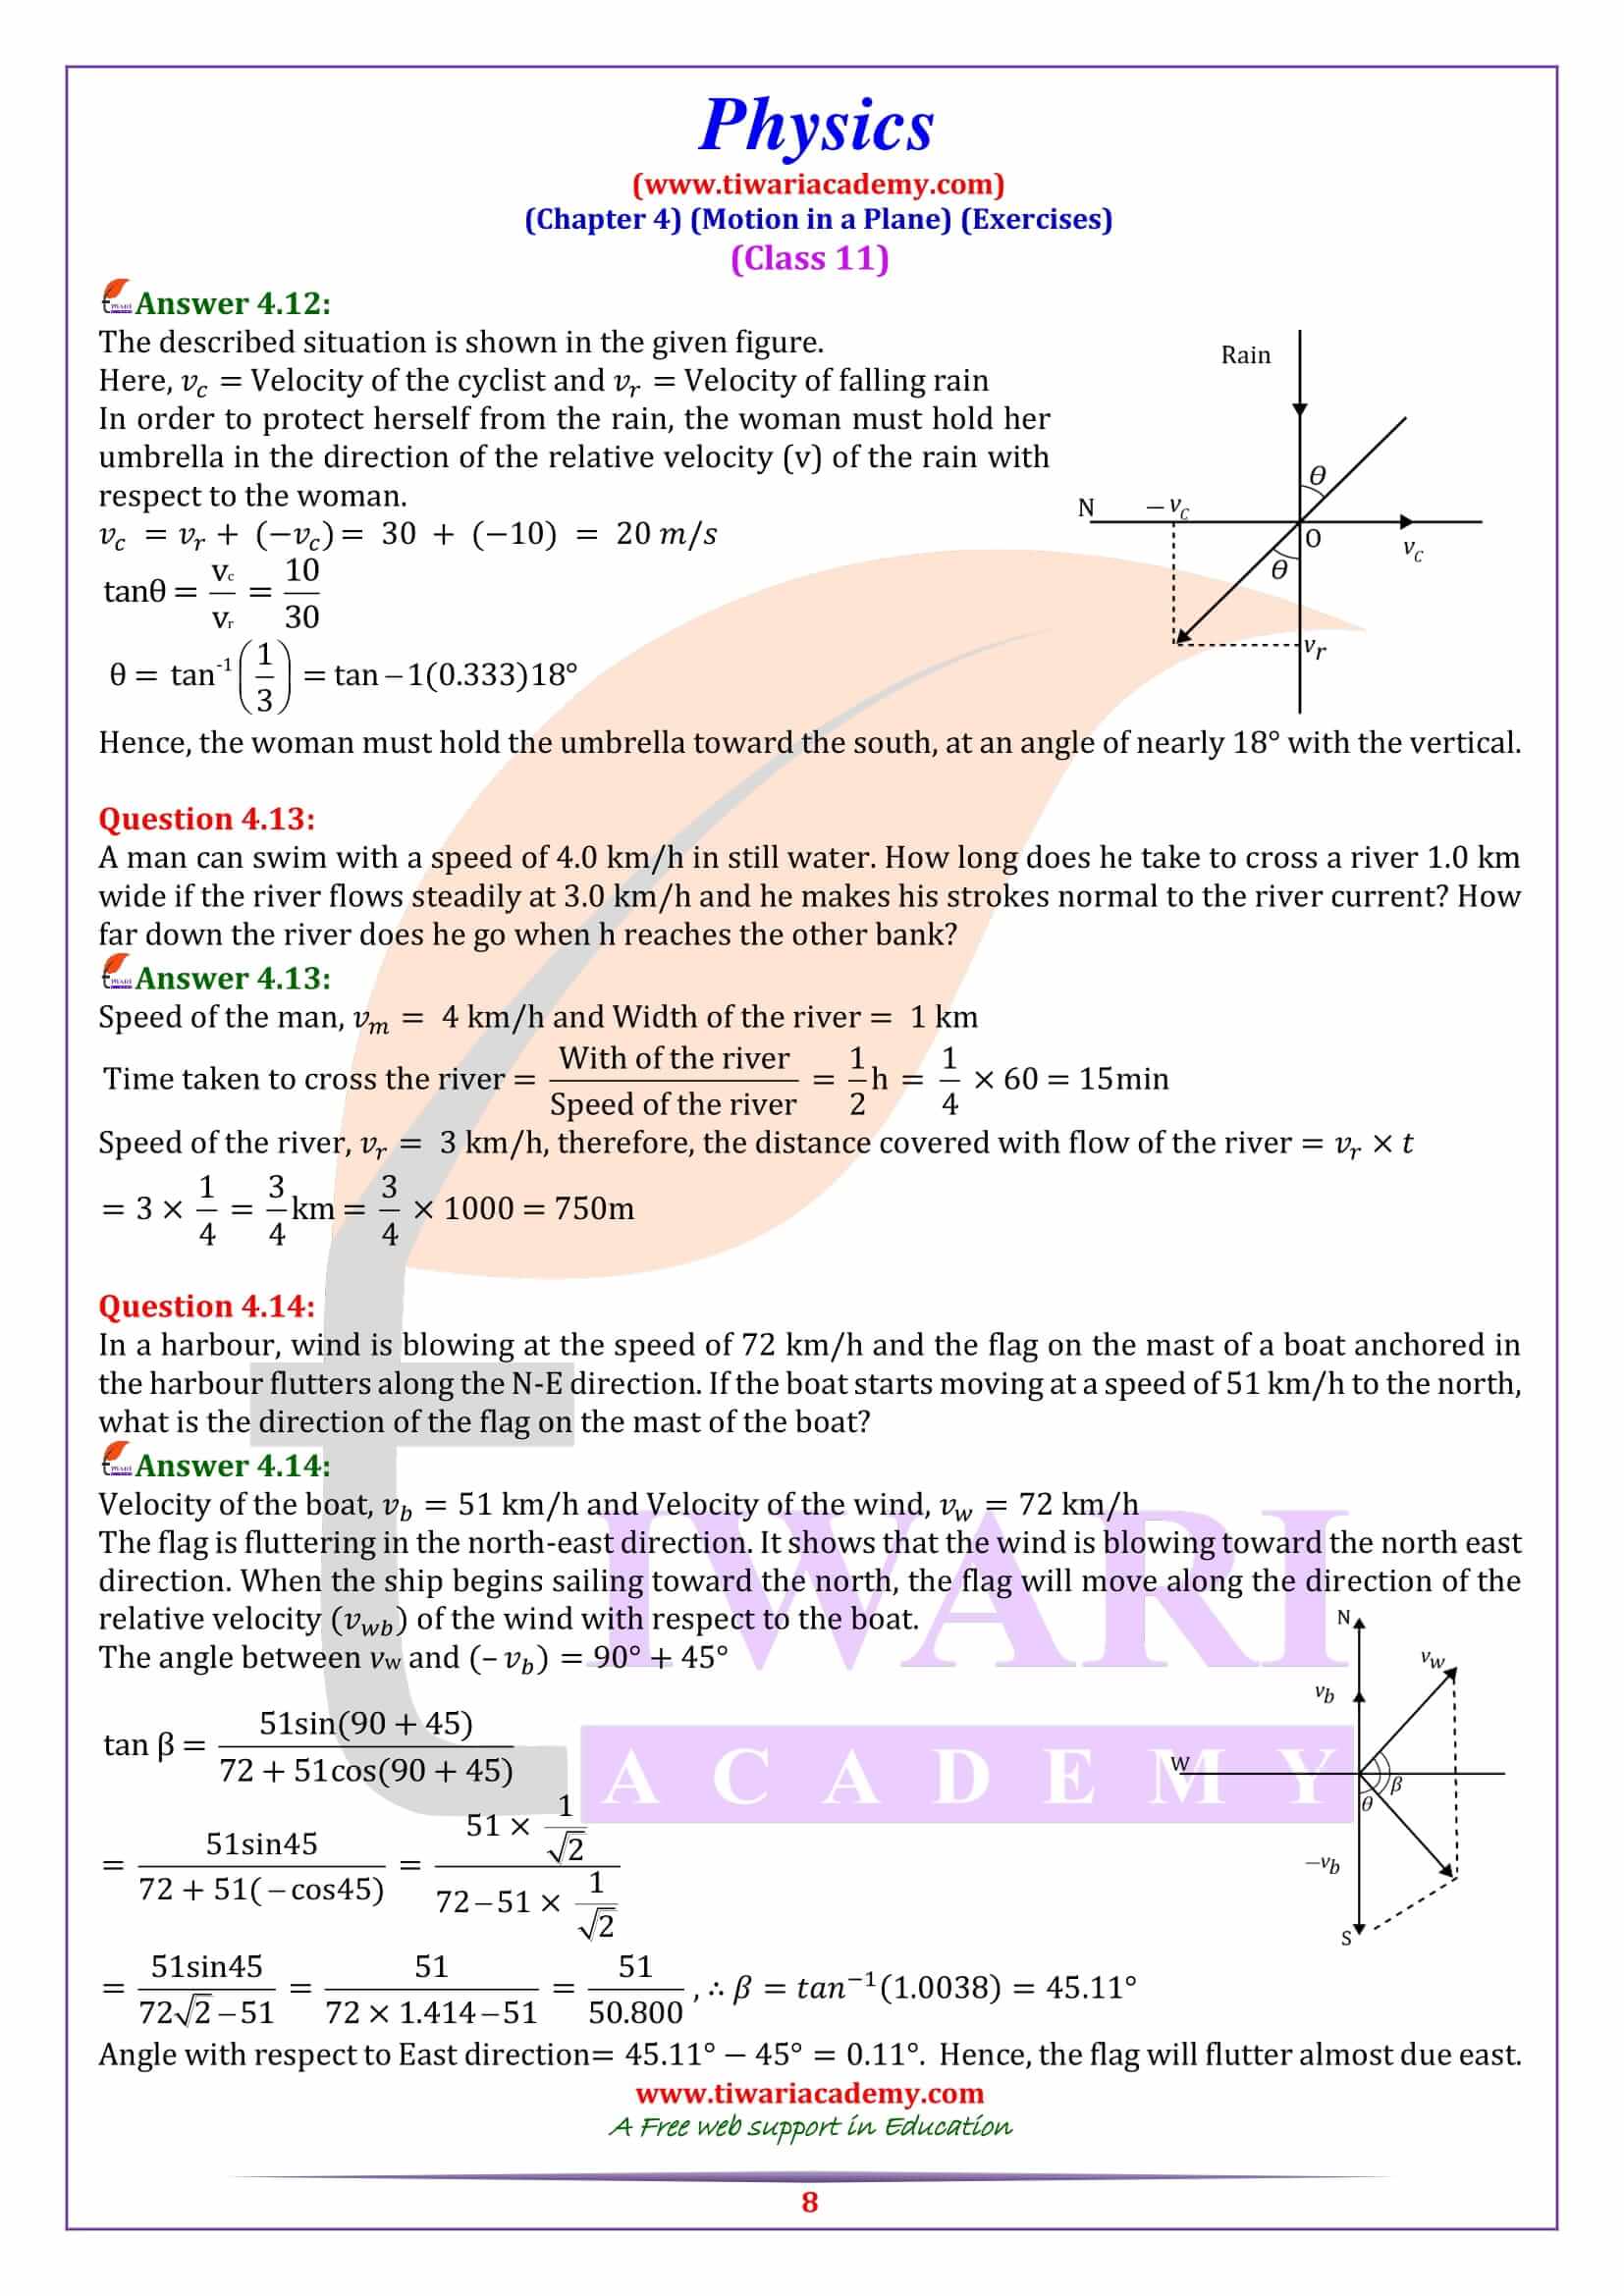 NCERT Solutions for Class 11 Physics Chapter 4 in PDF file